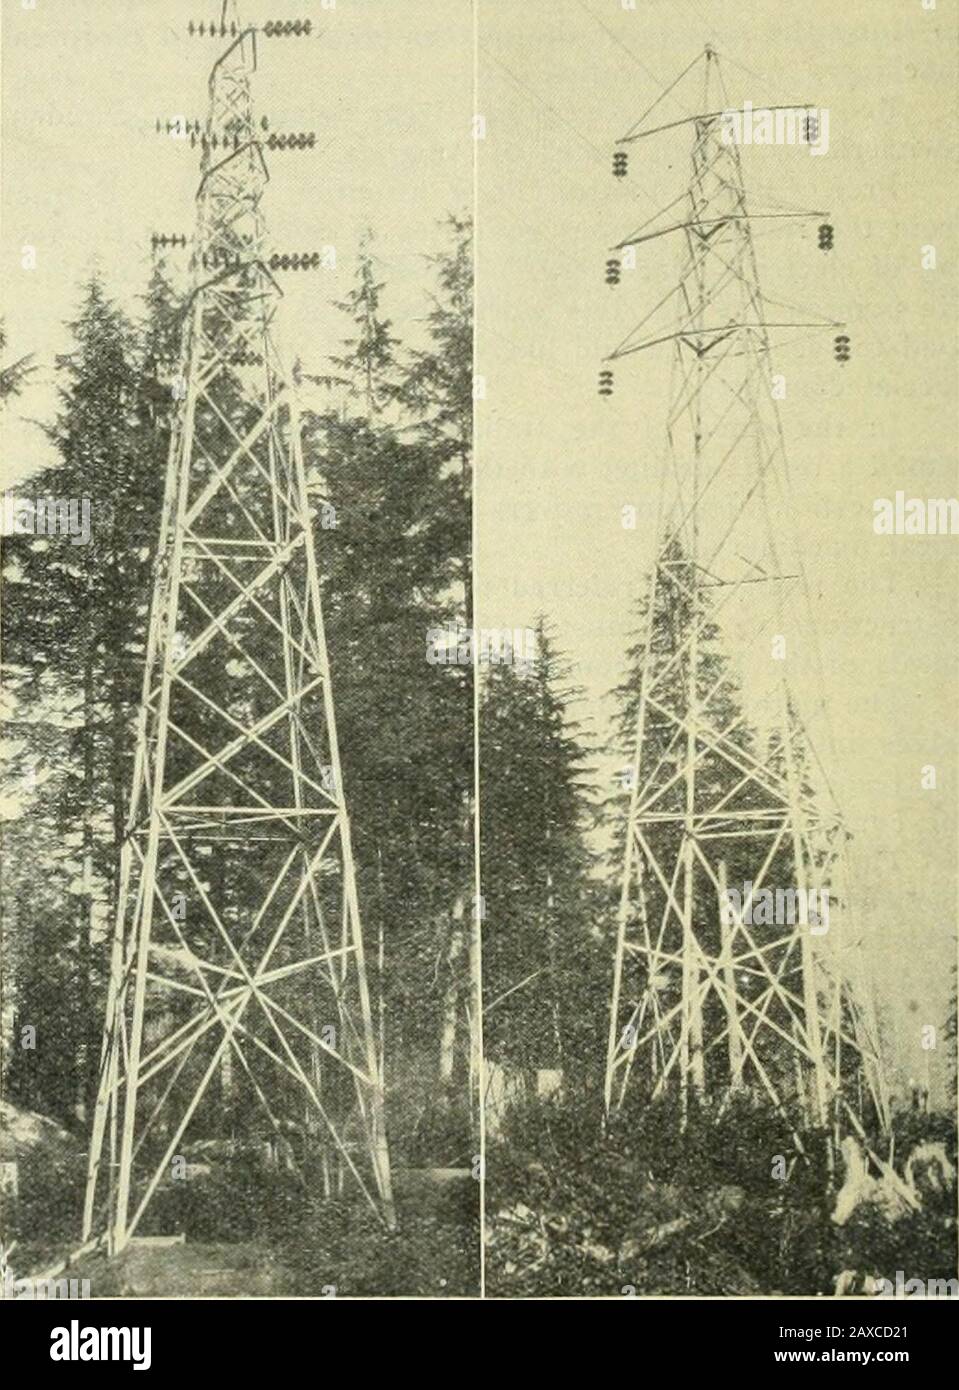 Electrical news and engineering . W. G. 1. Co.8 Receiving Station ut Ai-dley, B. C. lowest wire being 11 ft. above the ground. The standardspan is 660 feet, but is was necessary to vary this consider-ably at times, owing to inequalities in levels of the-ground.The standard towers are built and were satisfactorilytested to withstand strains of 2,000 lbs. in any horizontaldirection at any point of support for the lines, or H,000 Ib-^. • Electrical Engineer, WoBtern CnnmlfV Power Co. in any horizontal direction on the tower as a whole at thecentre of gravity of the points of support. The vertical Stock Photo